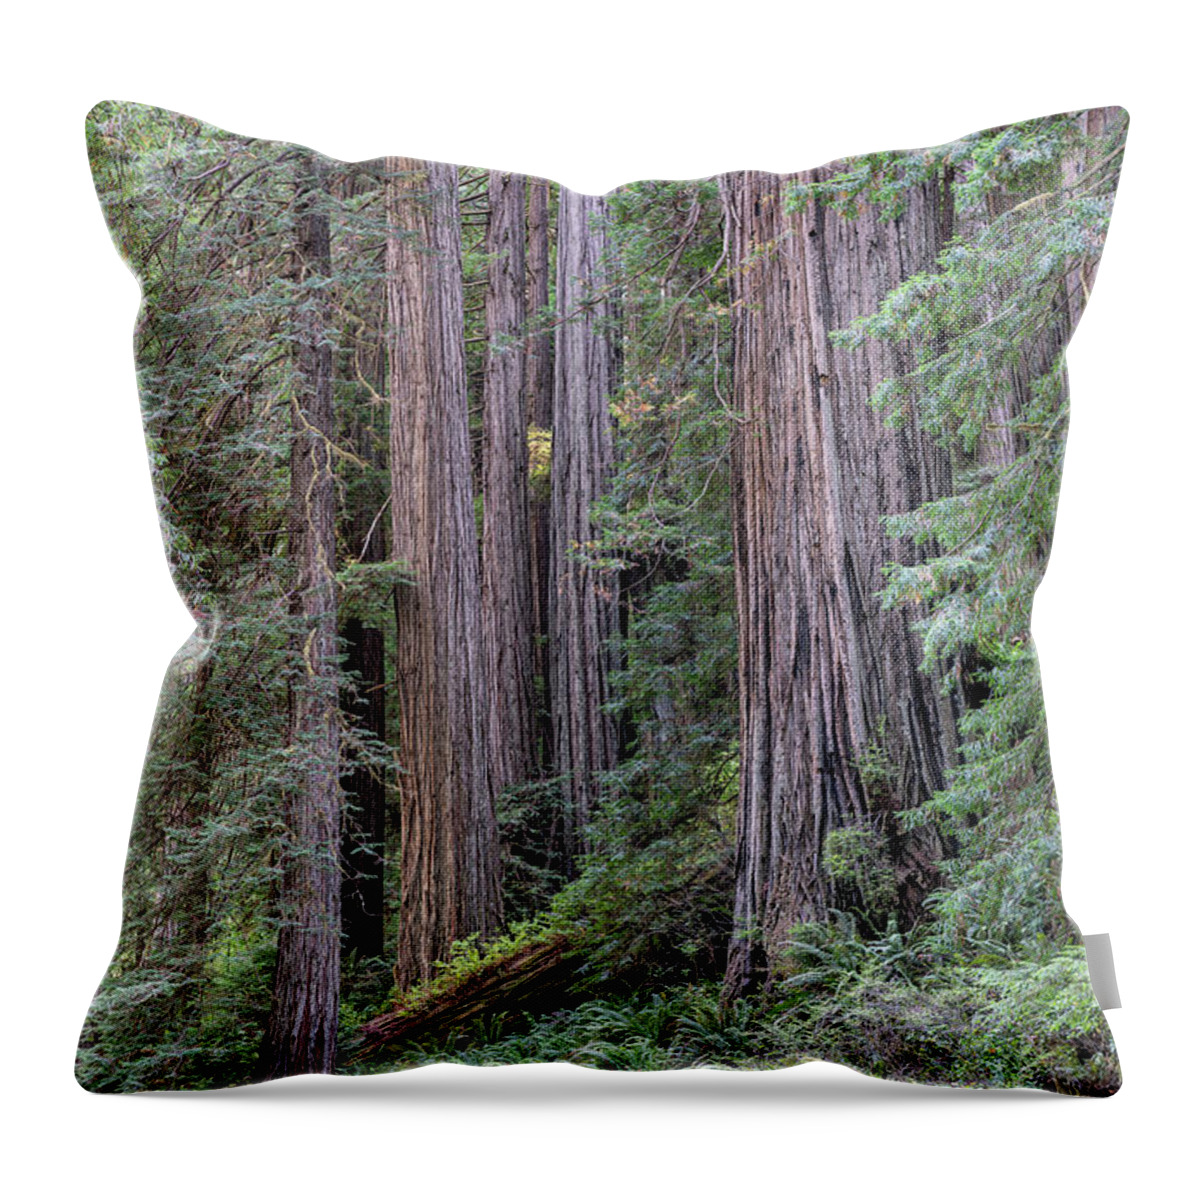 California Throw Pillow featuring the photograph Redwoods by Rudy Wilms